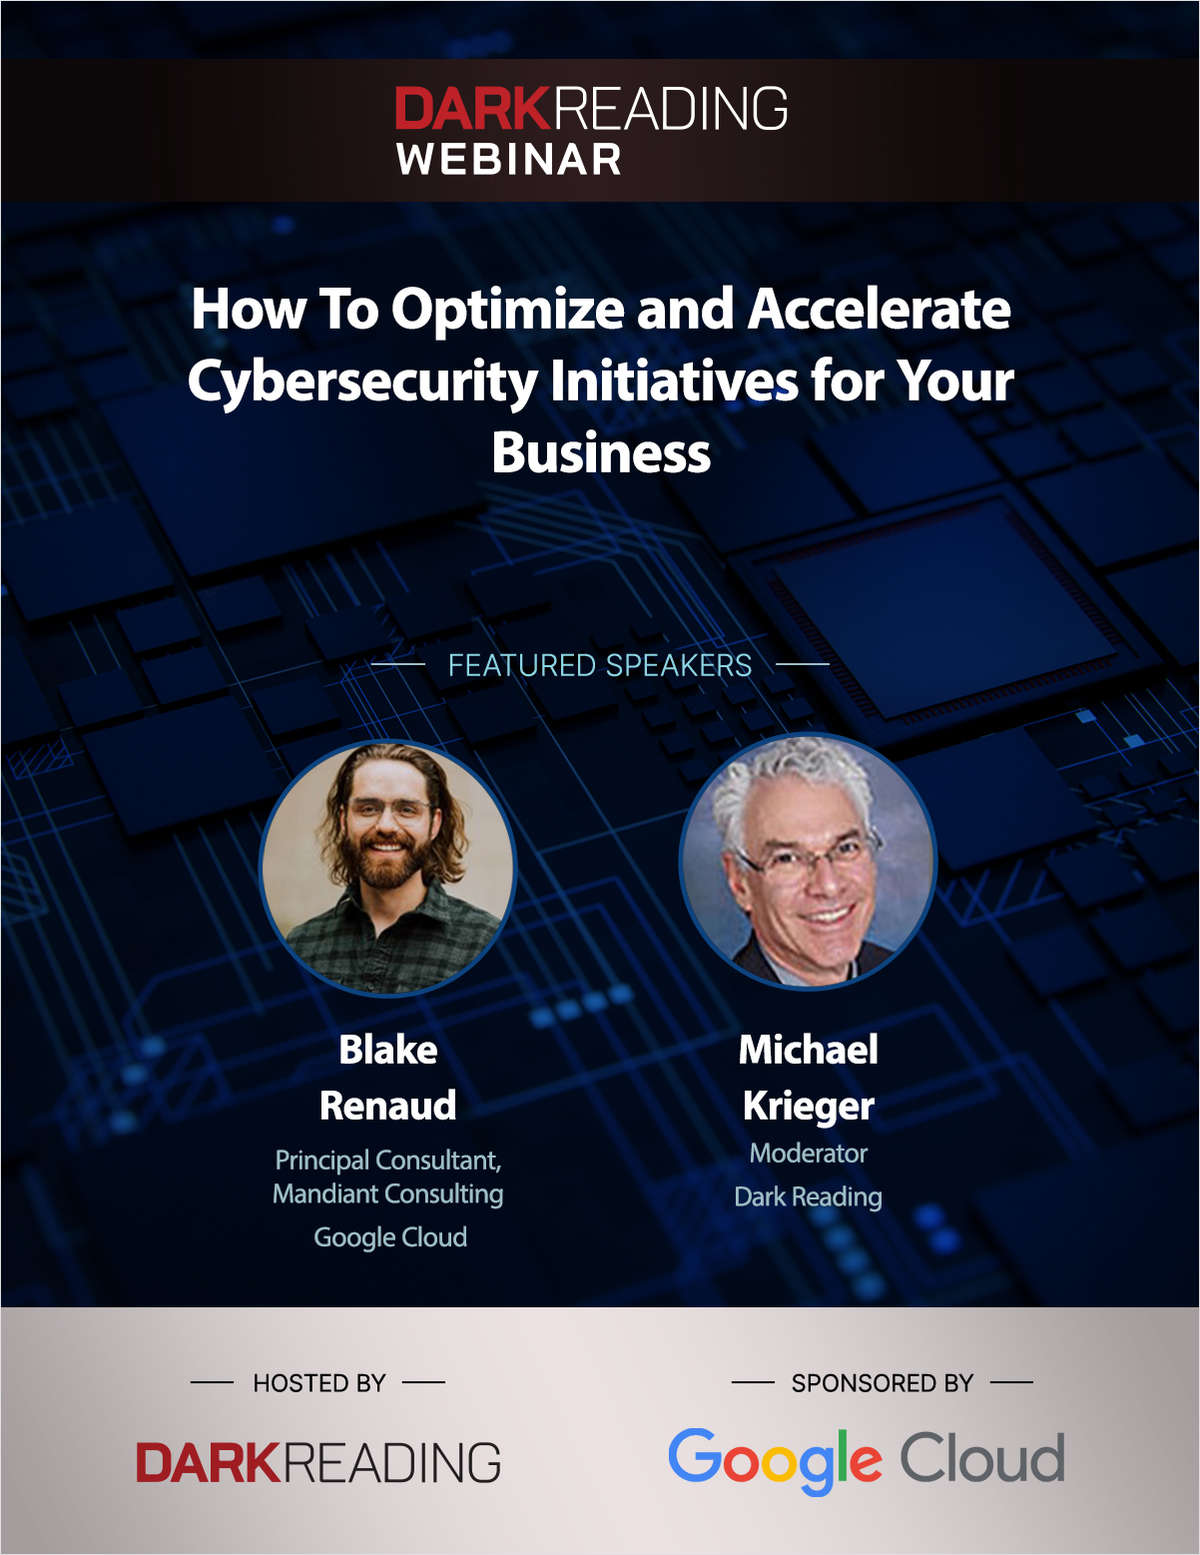 How To Optimize and Accelerate Cybersecurity Initiatives for Your Business